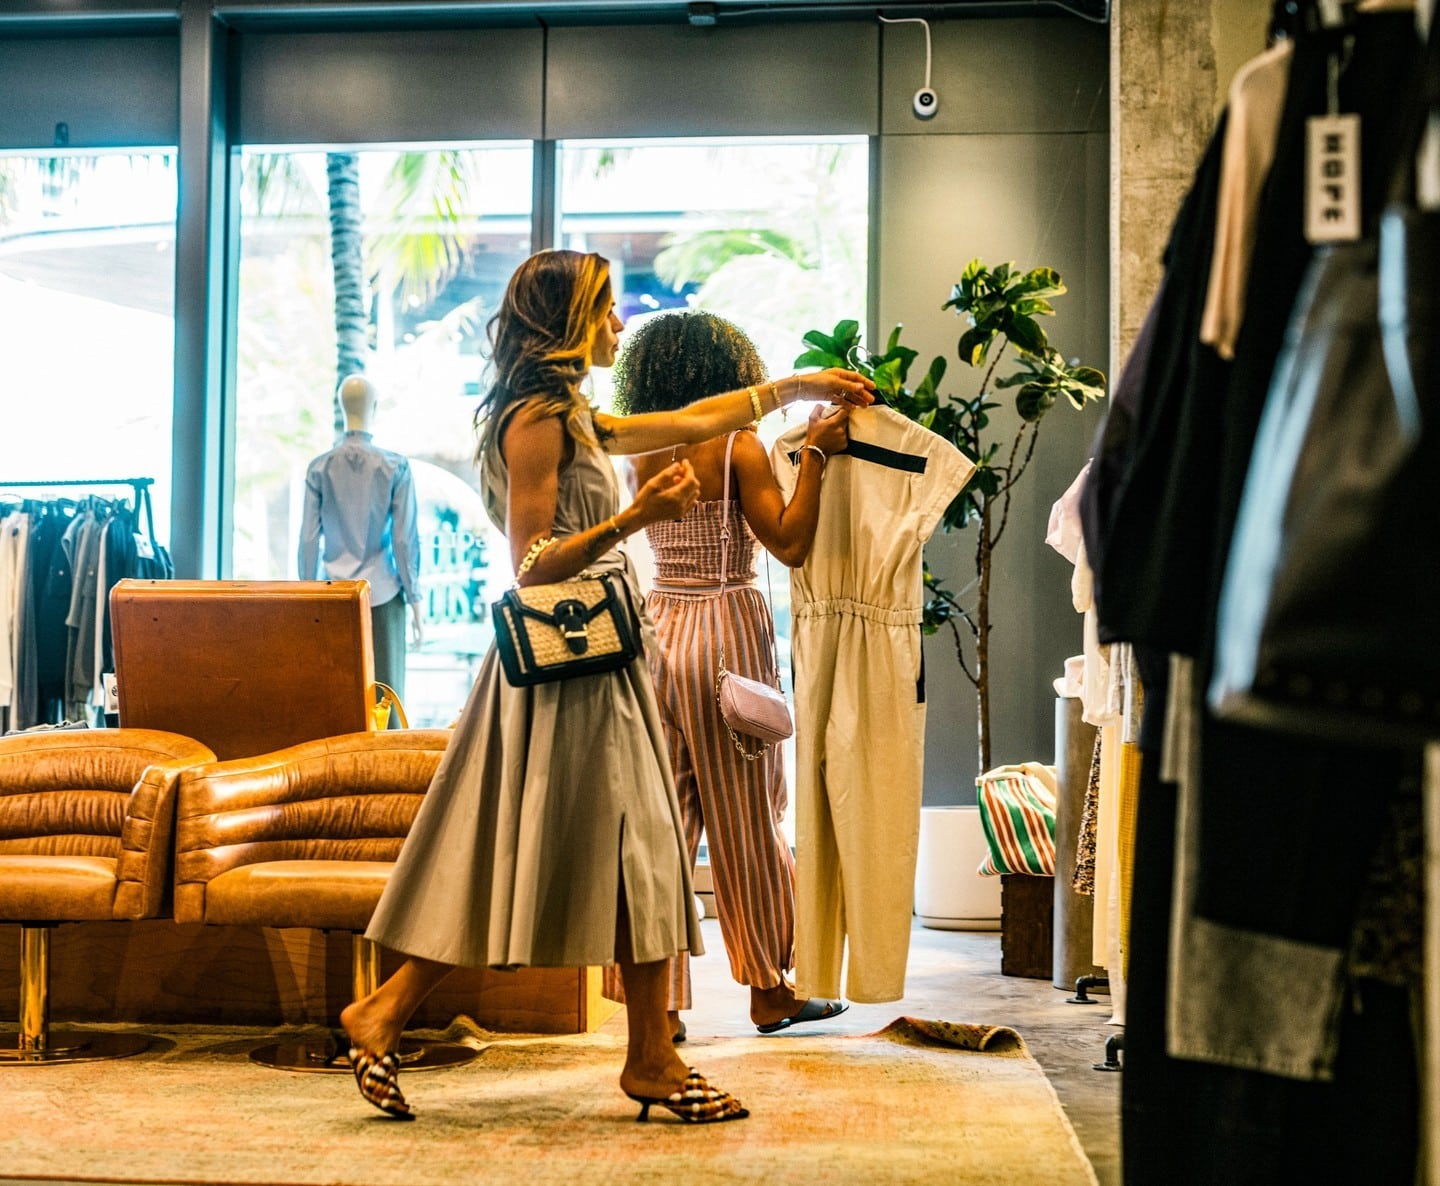 Shie Clark, owner of @weareiconic_honolulu, curates a variety of unique brands inspired by street style for her chic boutique at the Anaha Shops. Learn more about how she honed her fashion sense at an early age in a recent @kakaakovertmag article at the link in our bio.